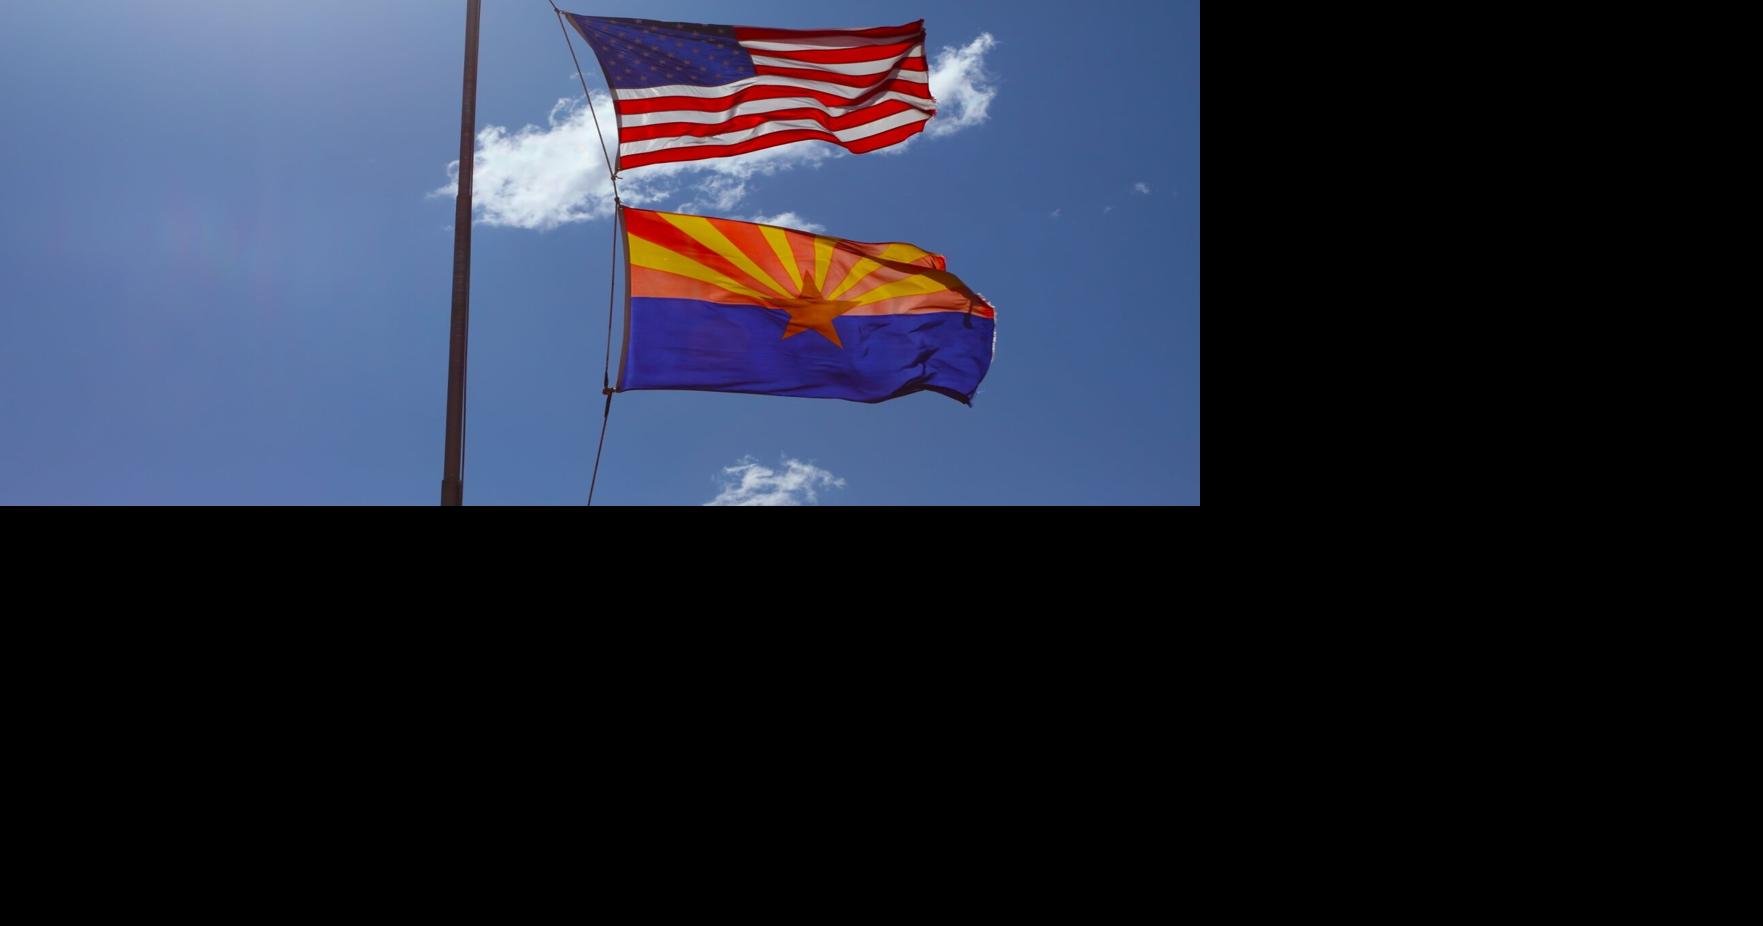 Arizona life expectancy fell in 2020, CDC reports News